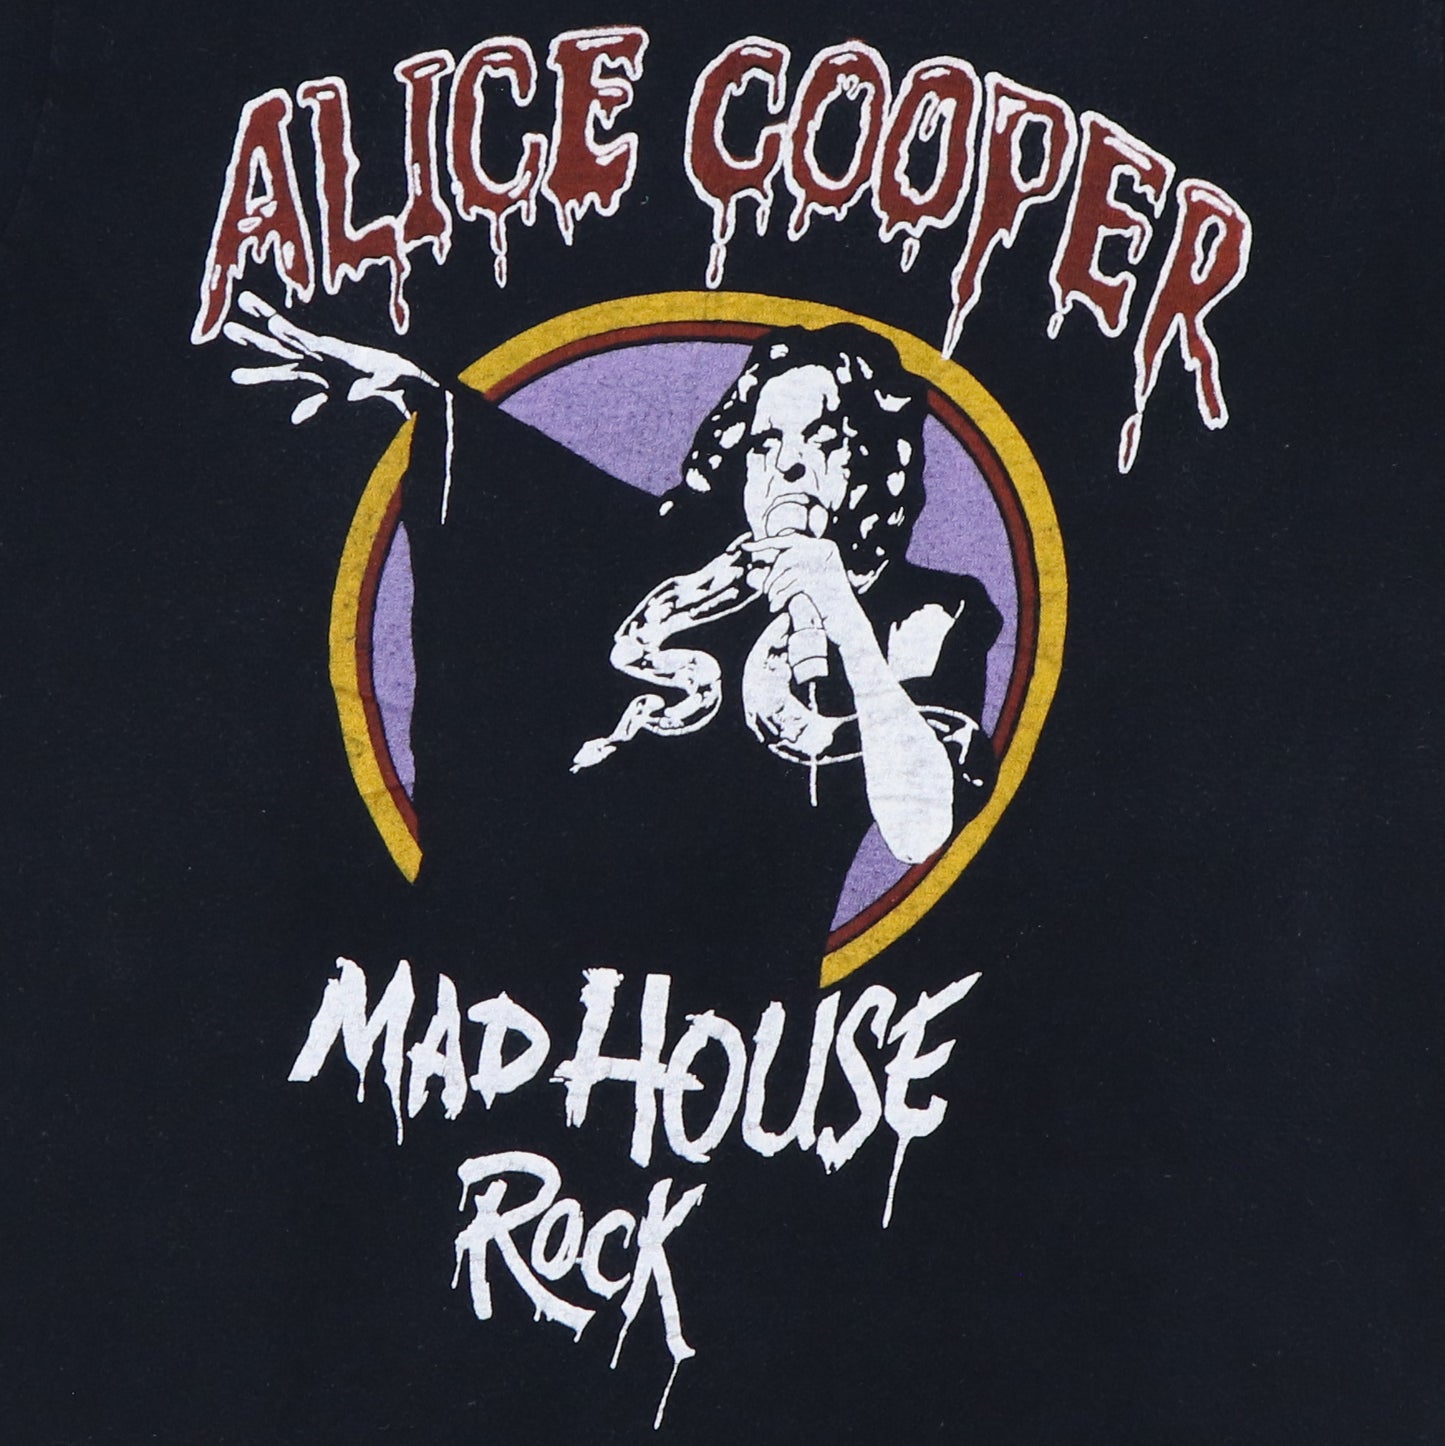 1979 Alice Cooper Madhouse Rock Tour Shirt